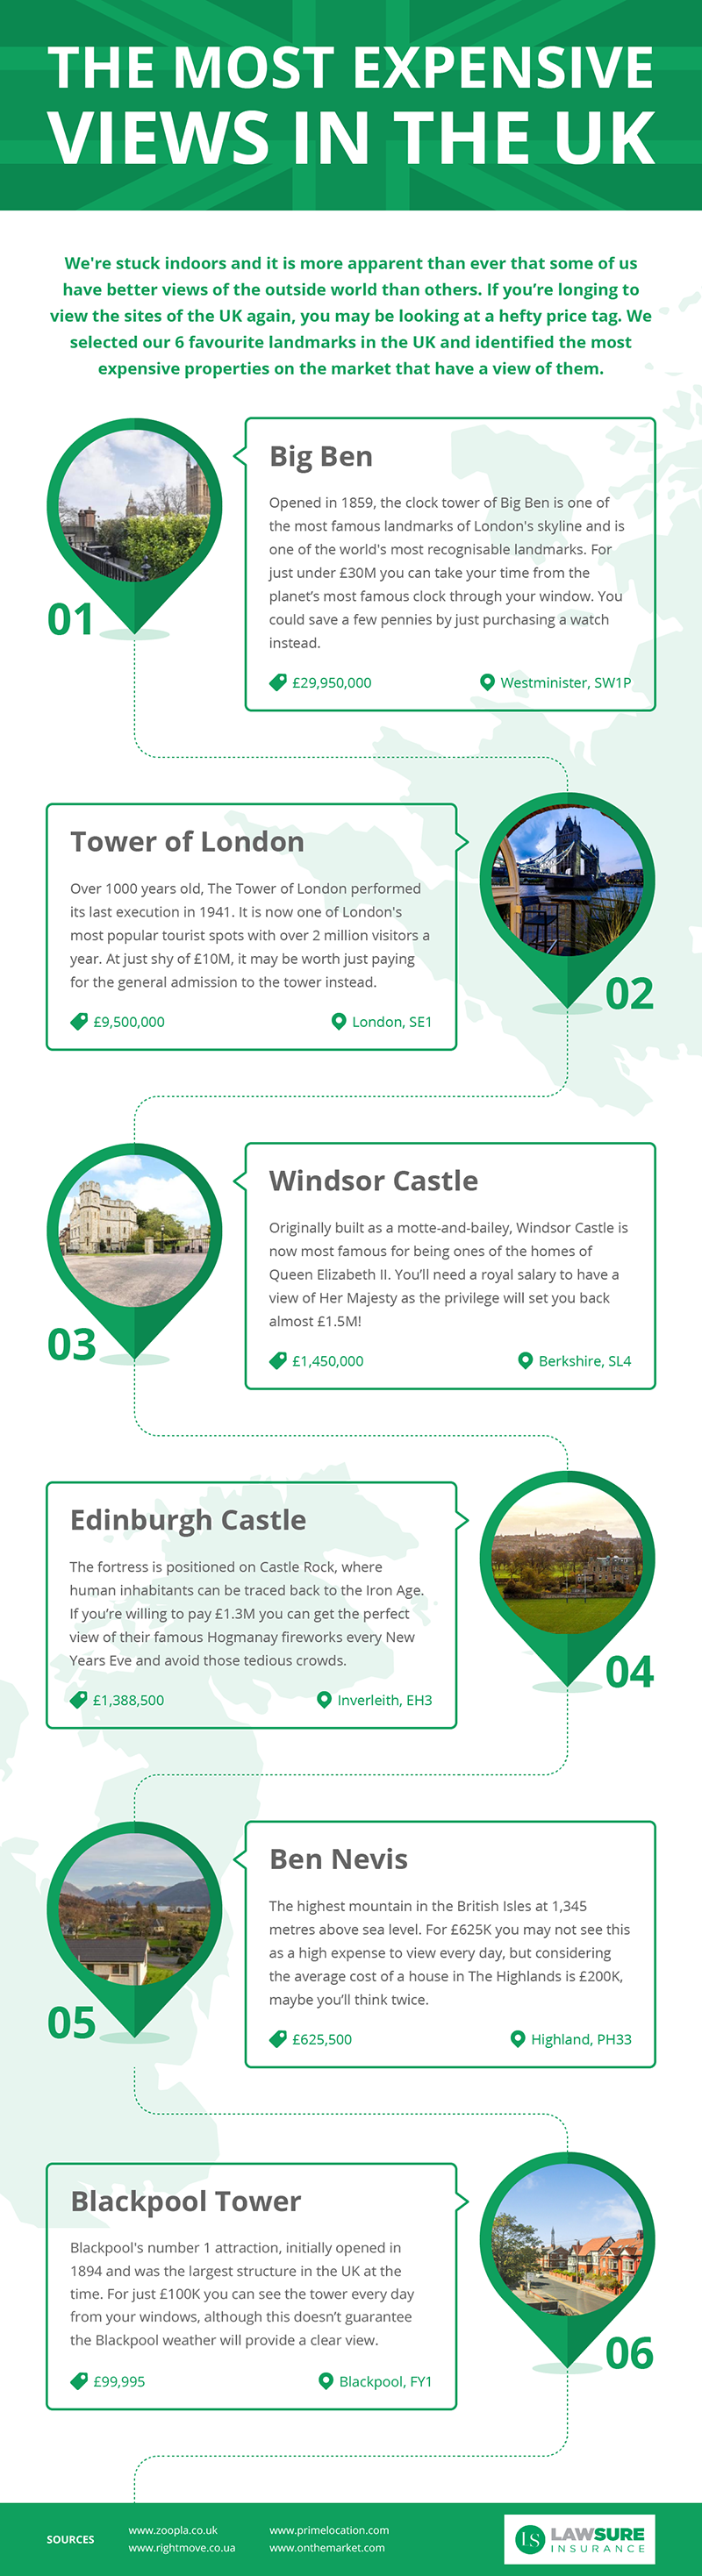 The Ultimate Cost of Saving to Live Near the UK’s Most Expensive Landmarks infographic